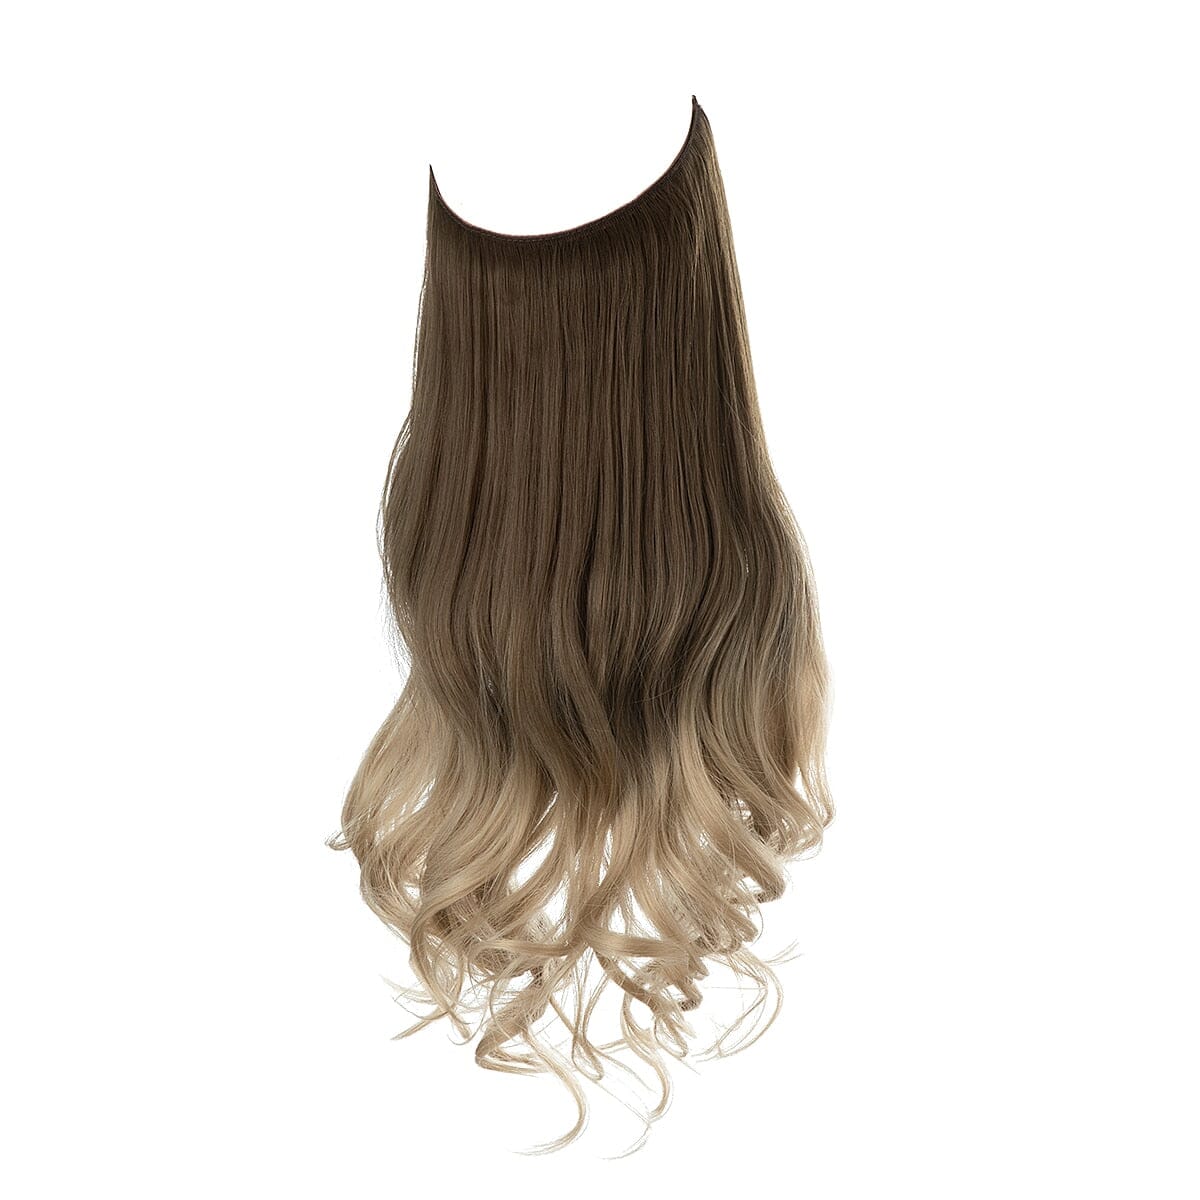 ExtensionWin™ I Hair Extension for Women 